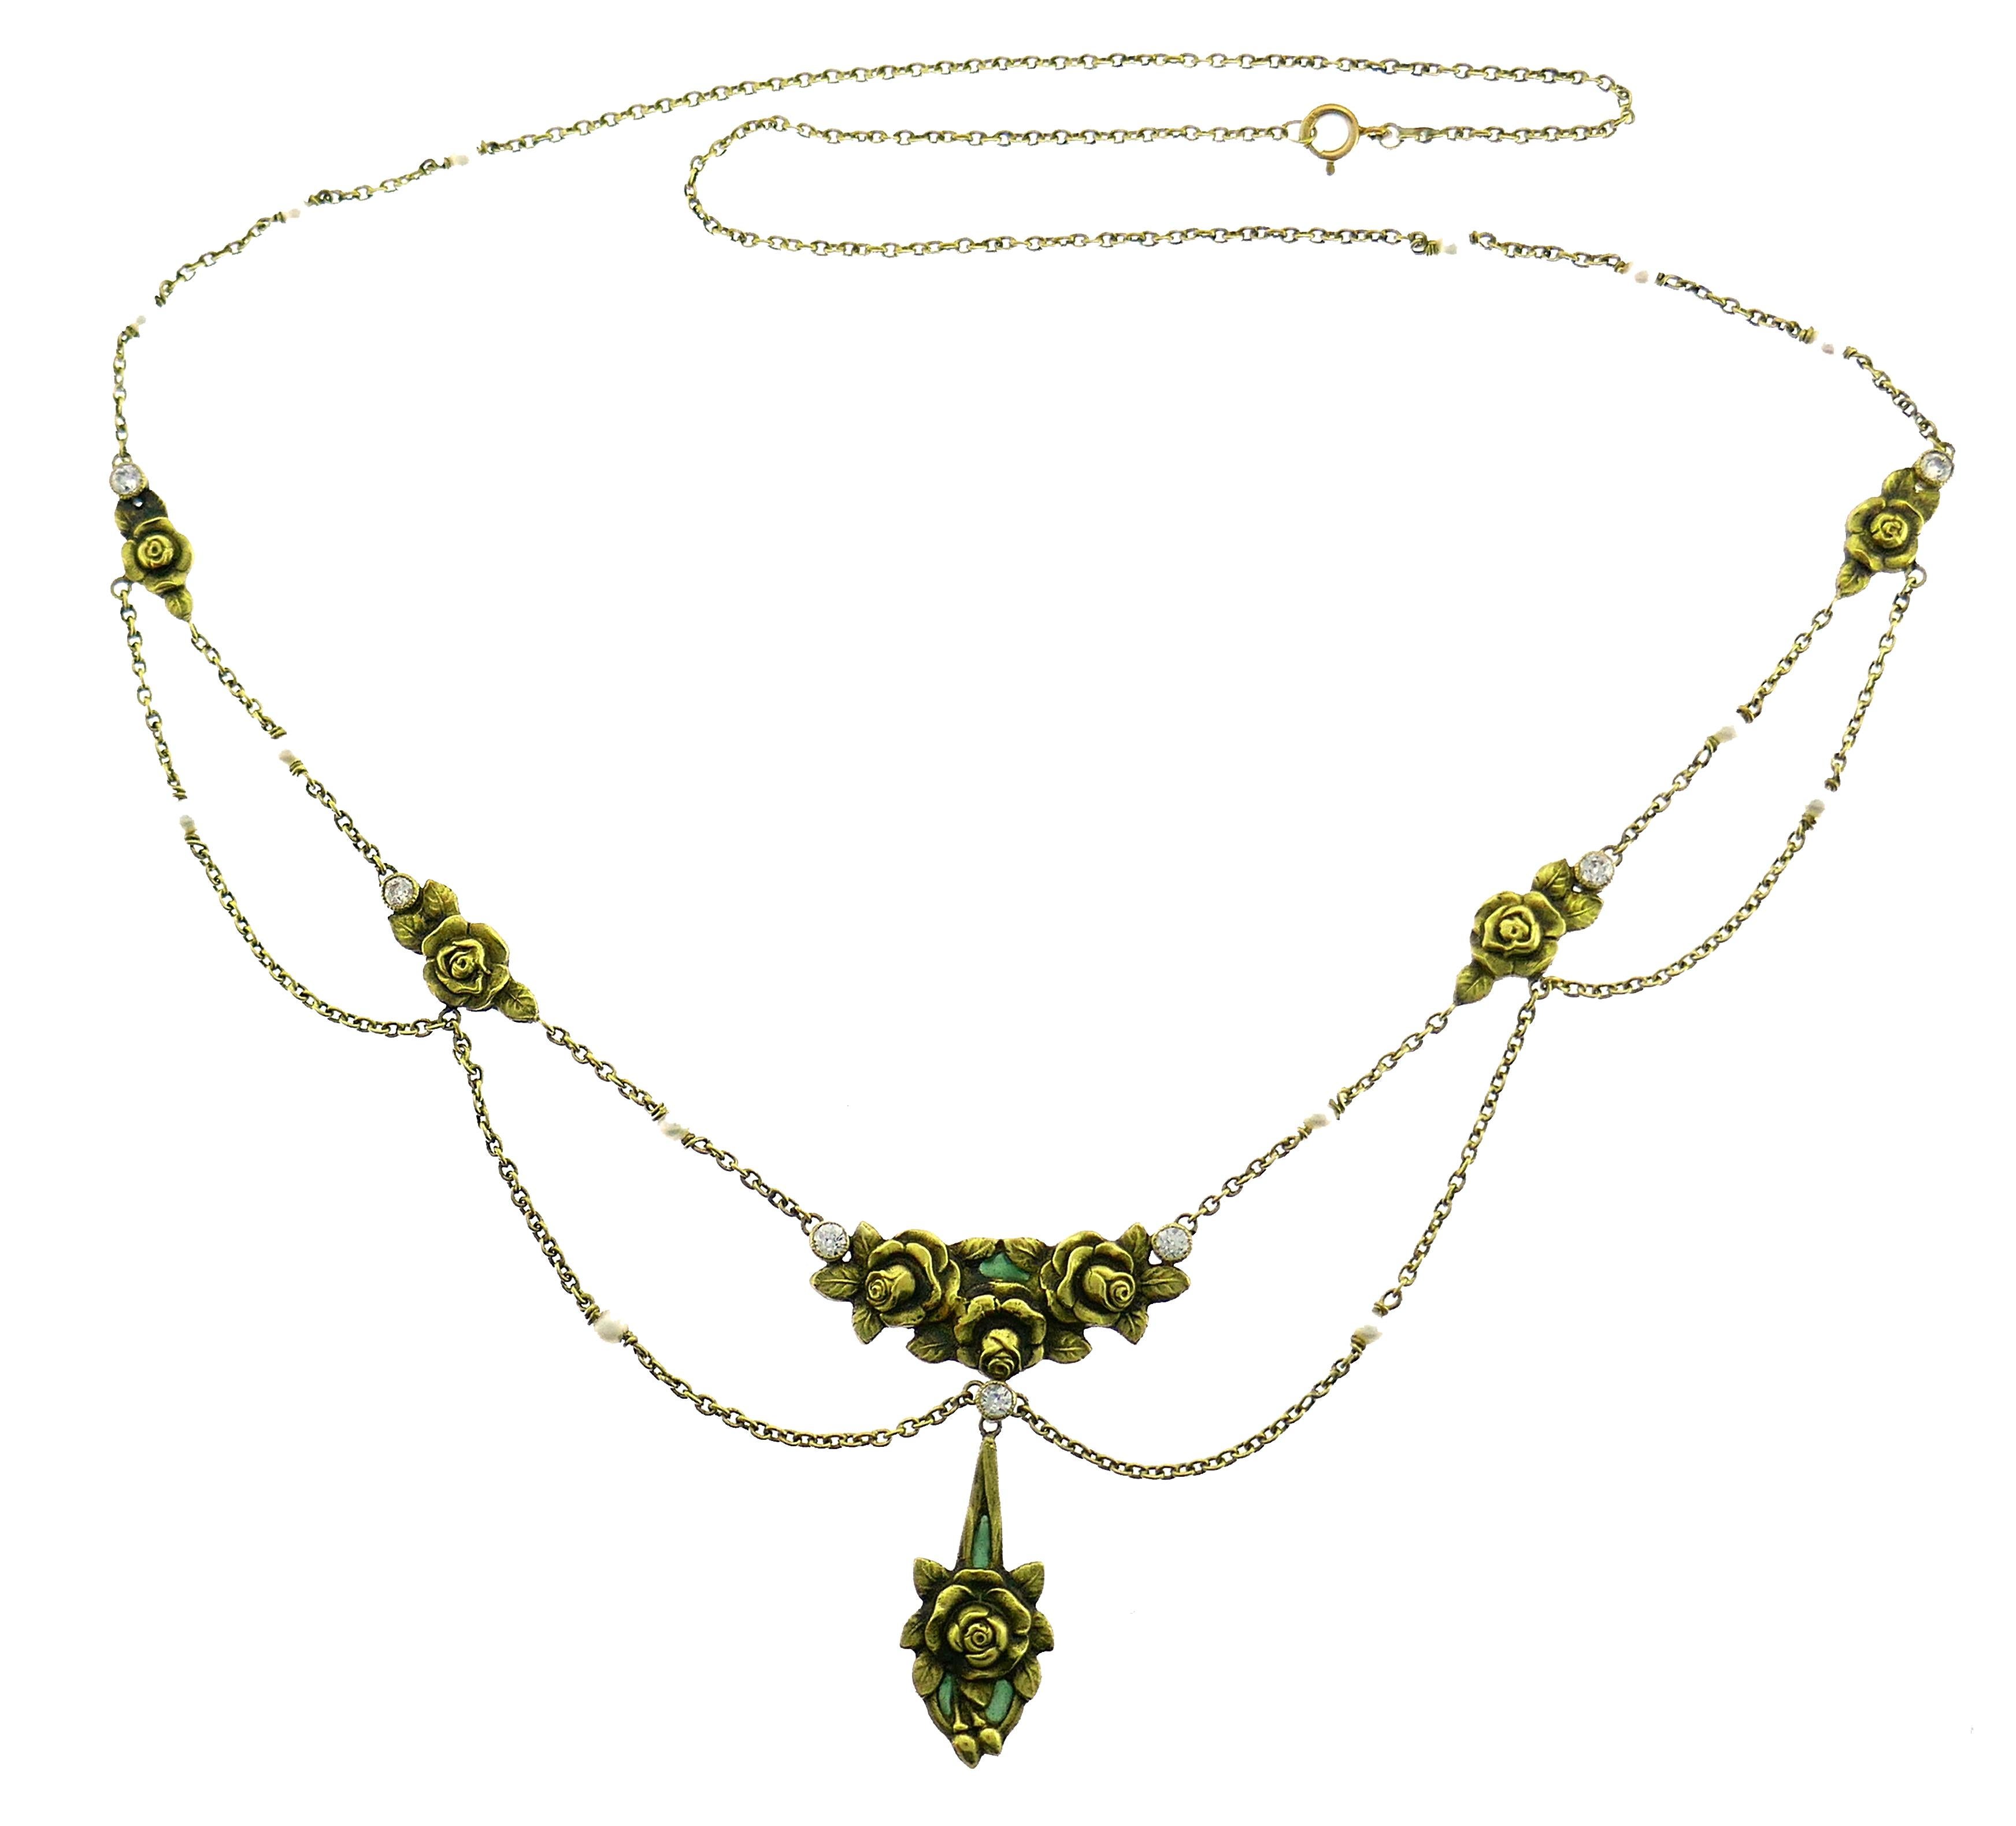 Exquisite Art Nouveau Egyptian revival set created in the 1930s. Delicate, feminine and wearable, the set is a great addition to your jewelry collection.
The set is made of 14 karat (tested) yellow gold, seed pearl and Old European cut diamonds and